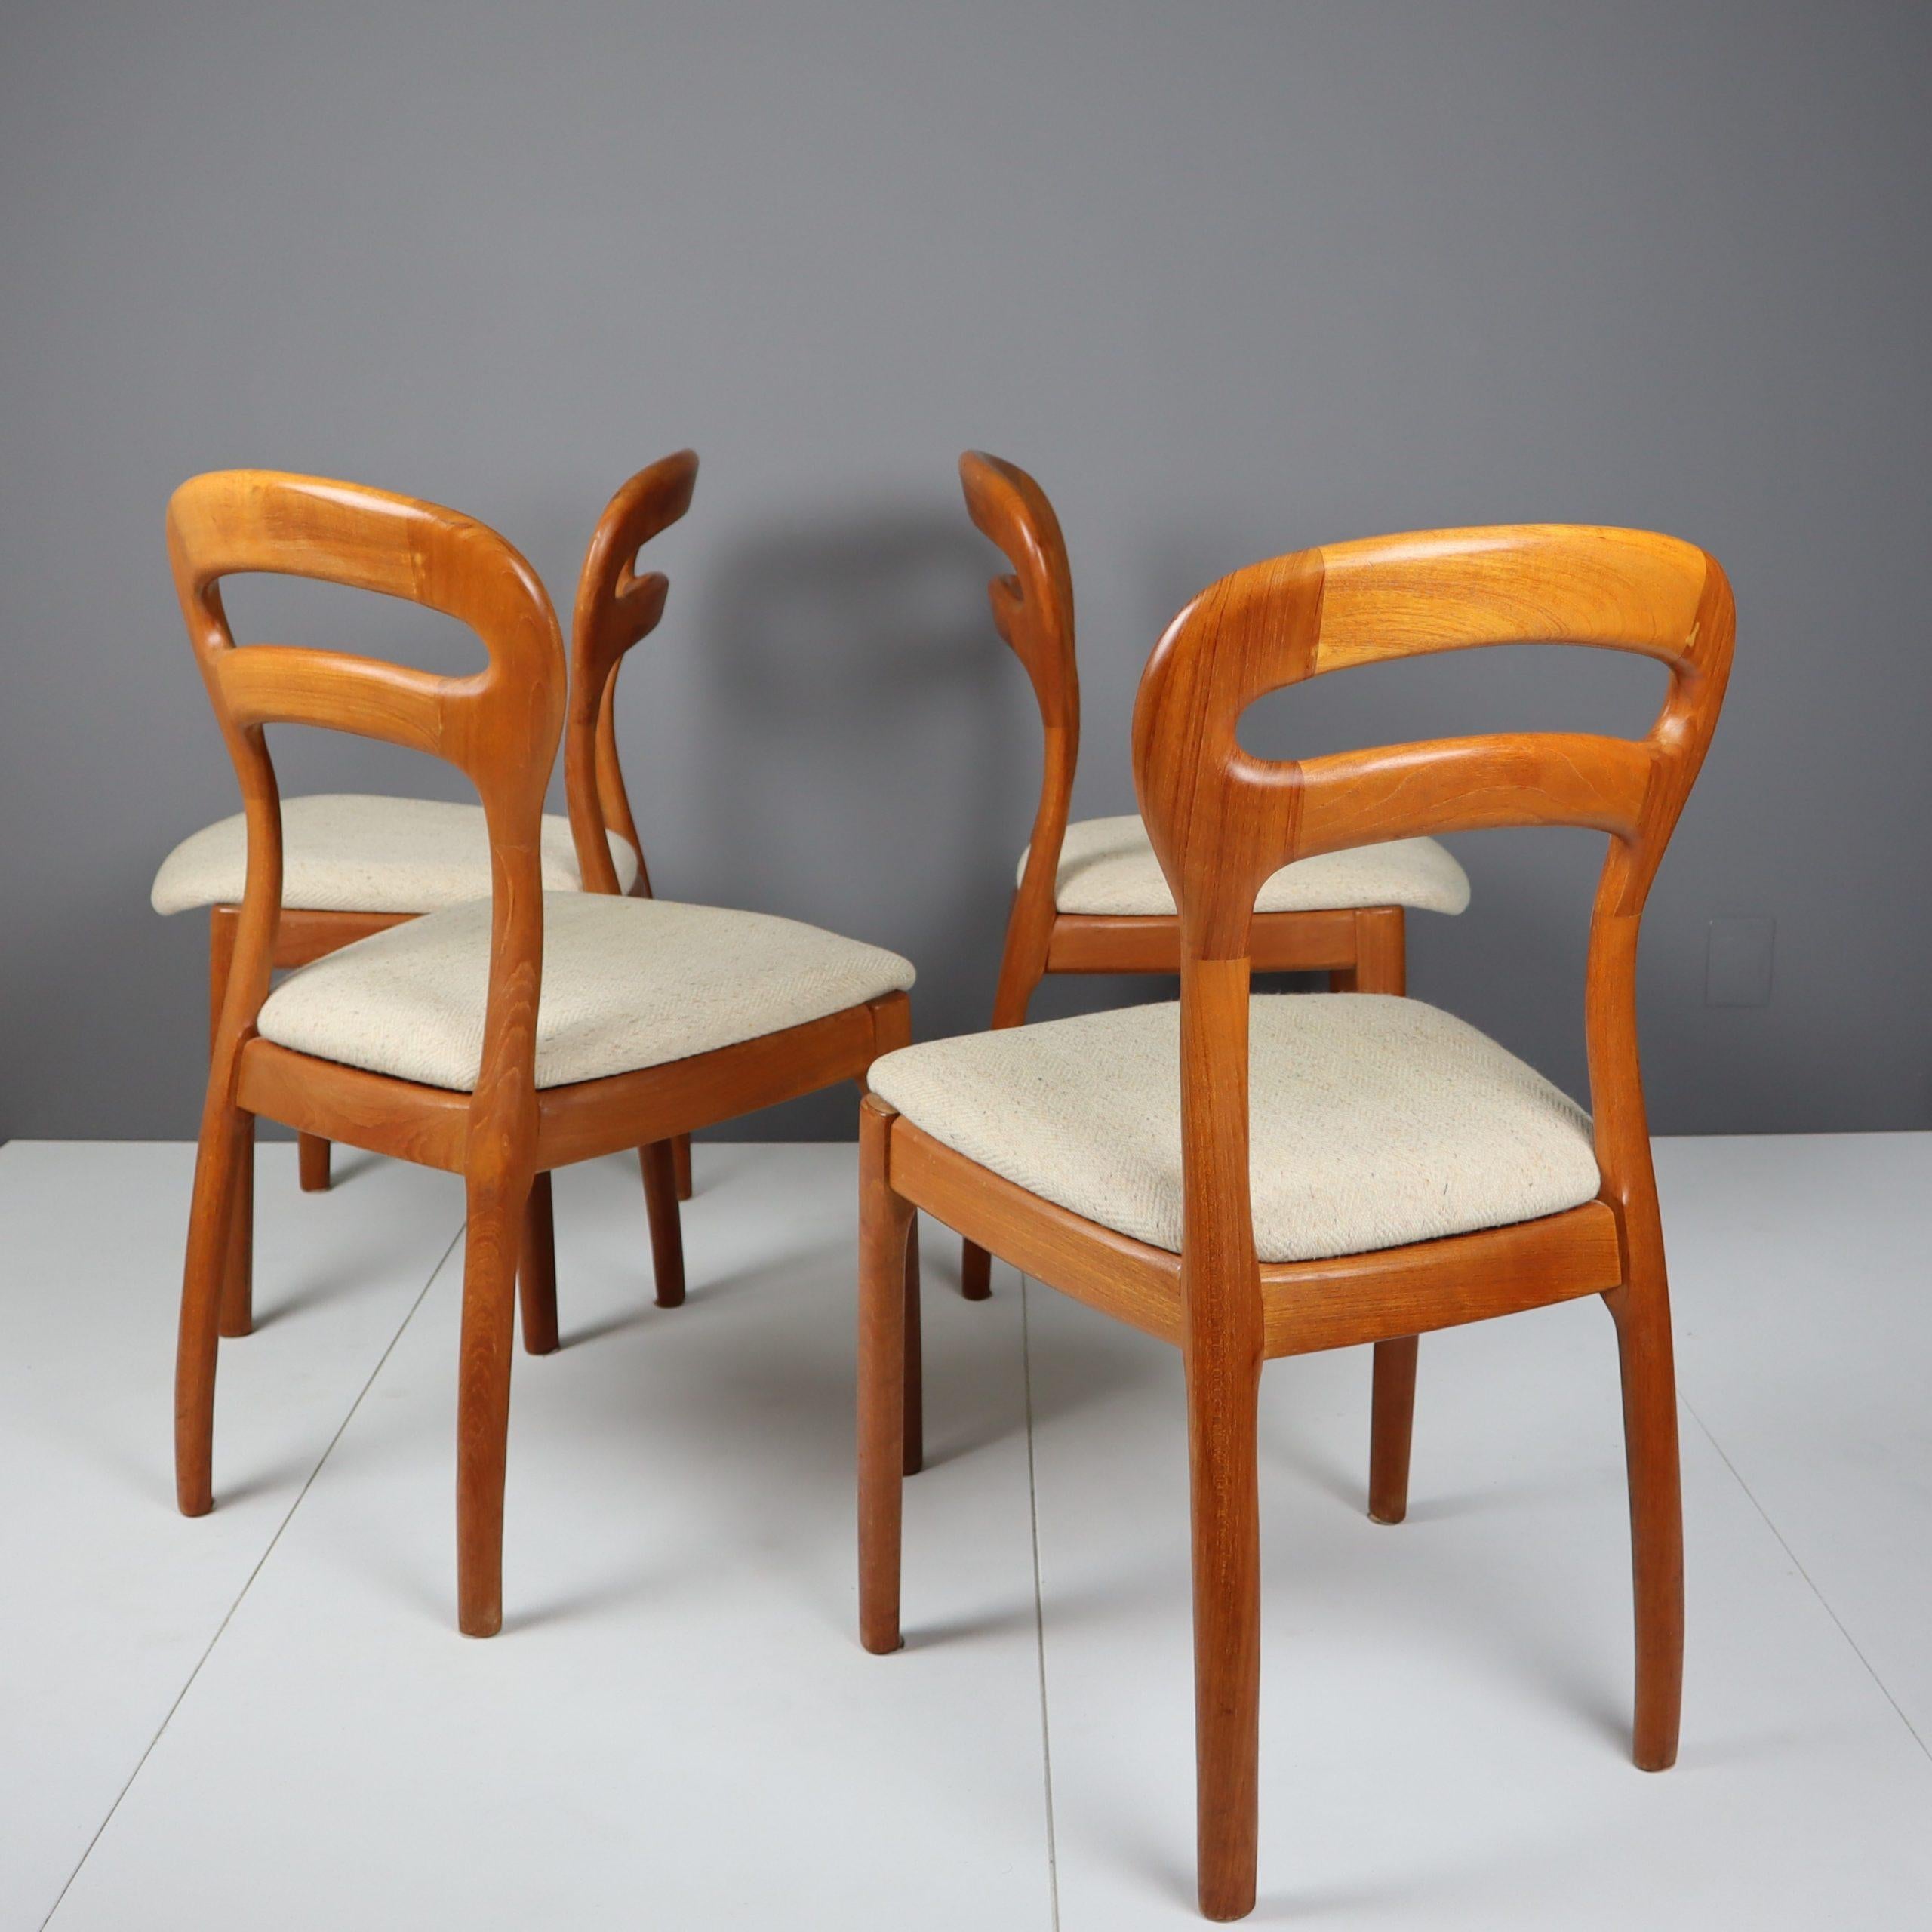 Four unusually-shaped Danish teak chairs. We have simply never come across these before. 

These chairs were bought at an auction in Germany in the fall of 2022. We fell in love with their spectacular shape, specifically the roundness of the